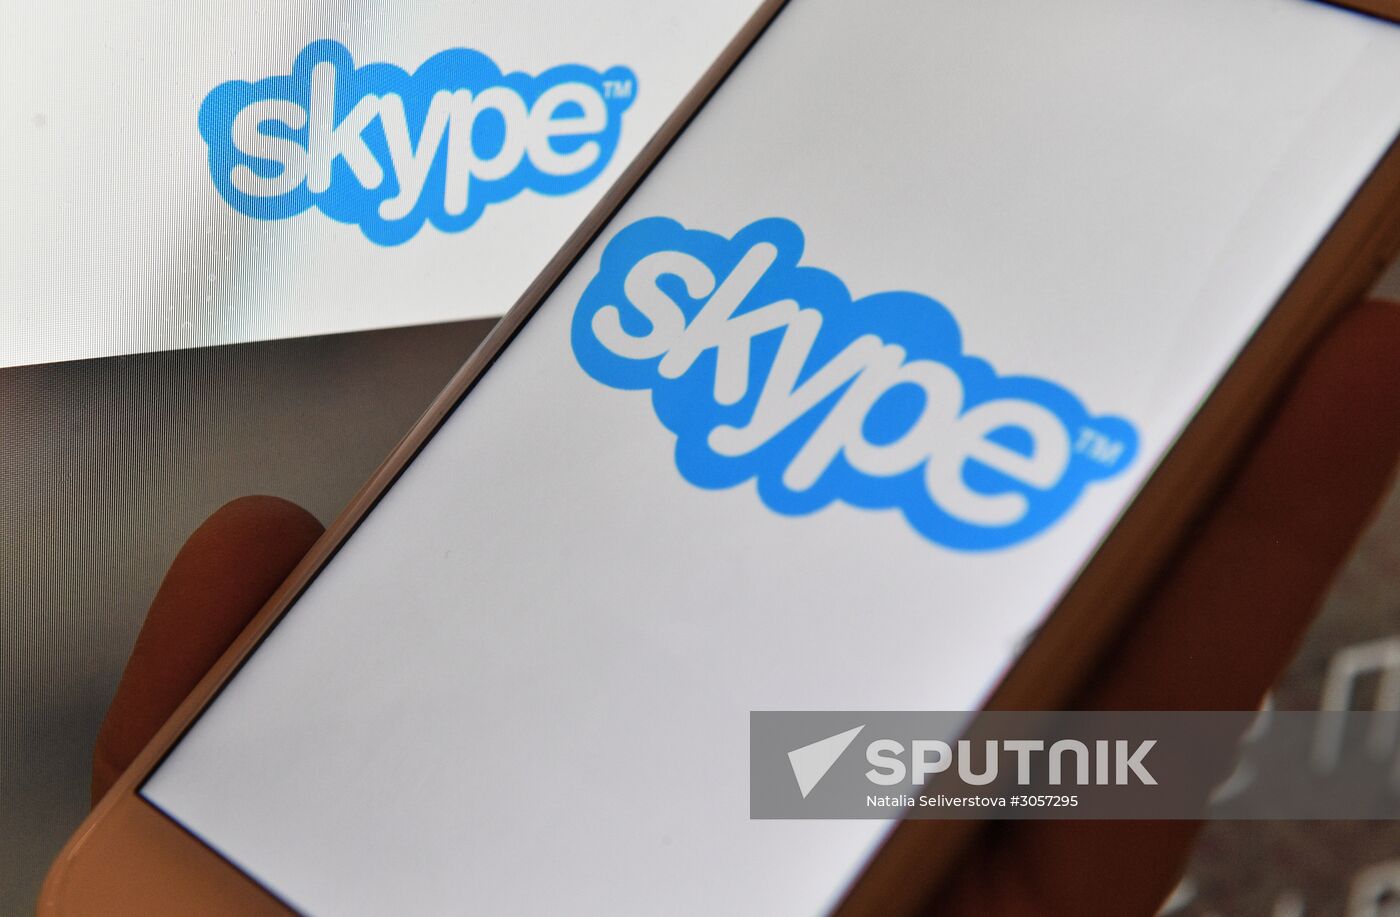 Skype voice-over IP and instant messaging service